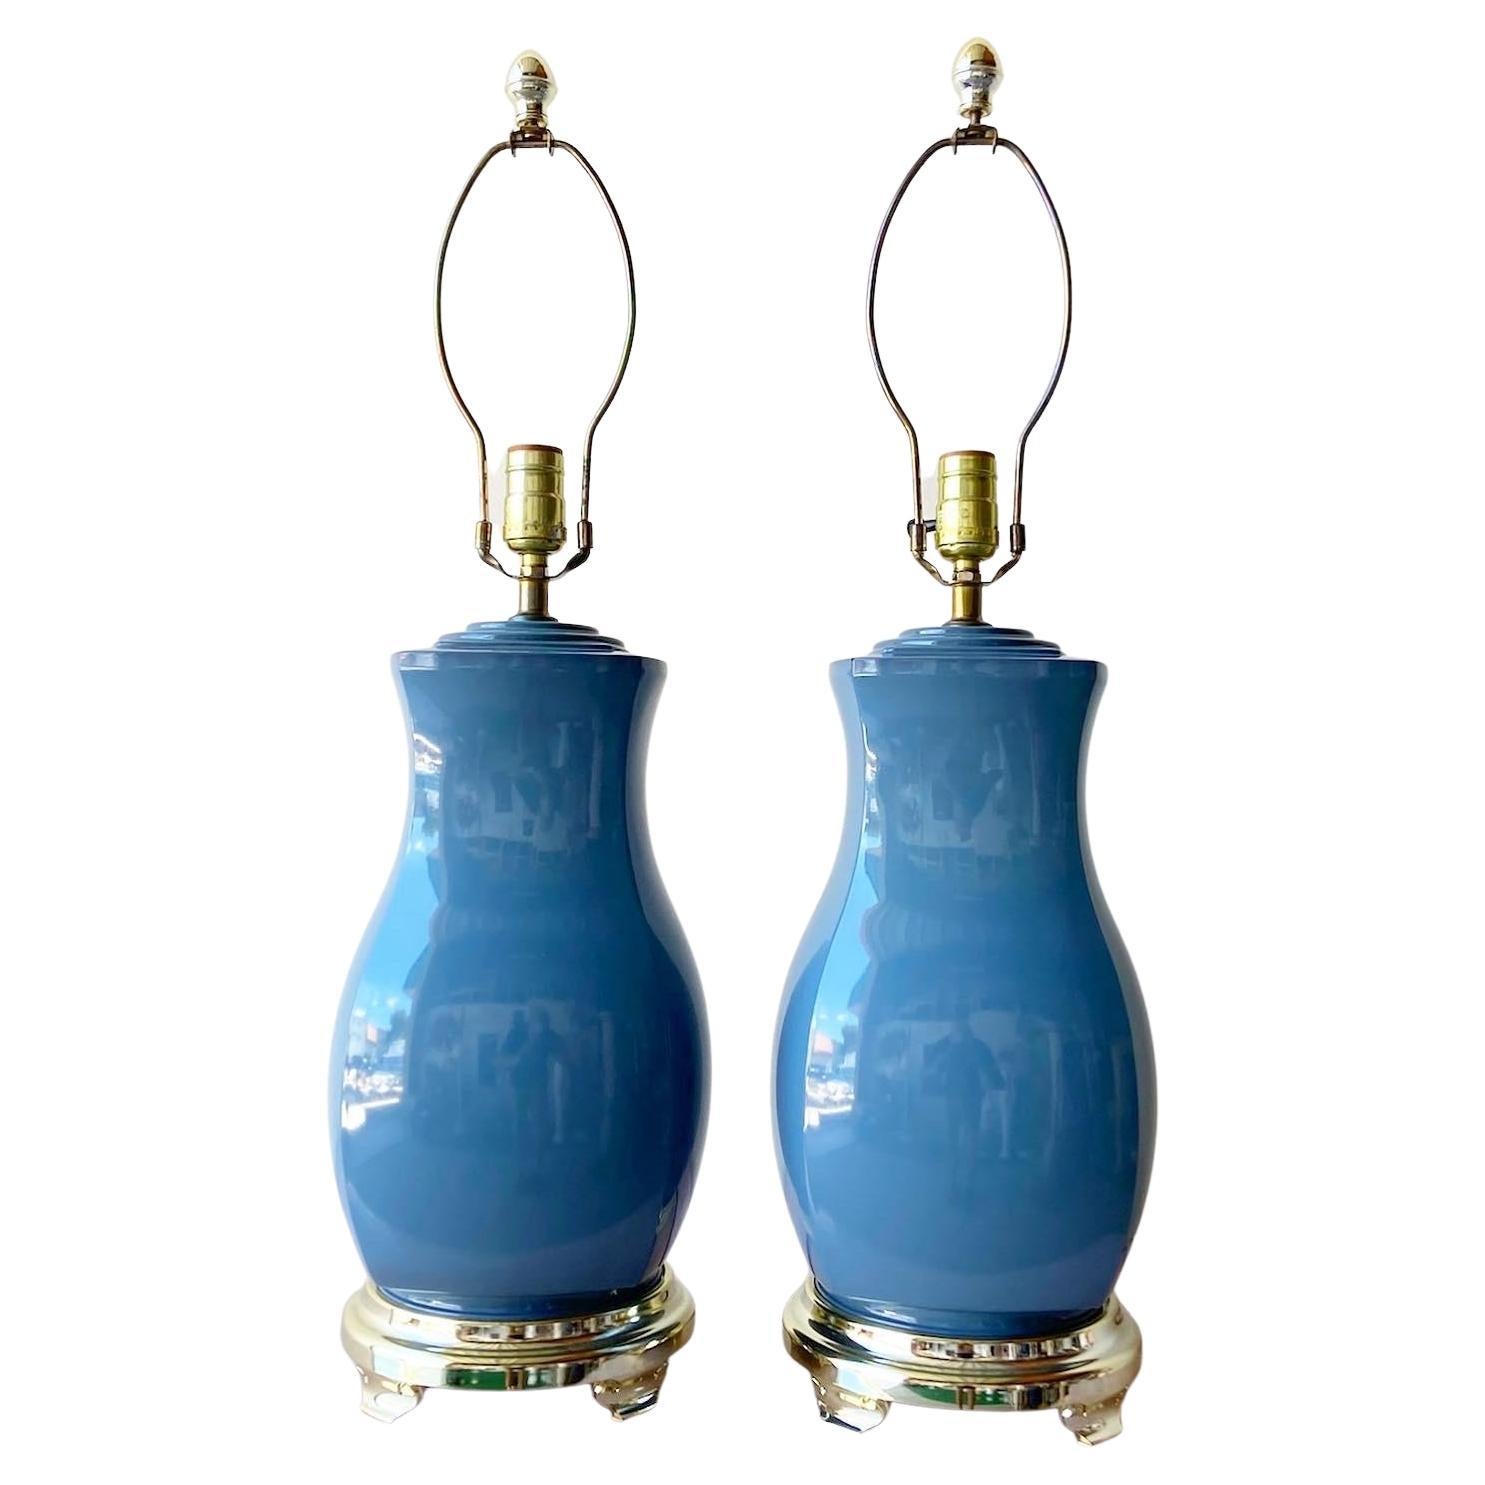 Postmodern Blue Porcelain Table Lamps With Gold Base - a Pair